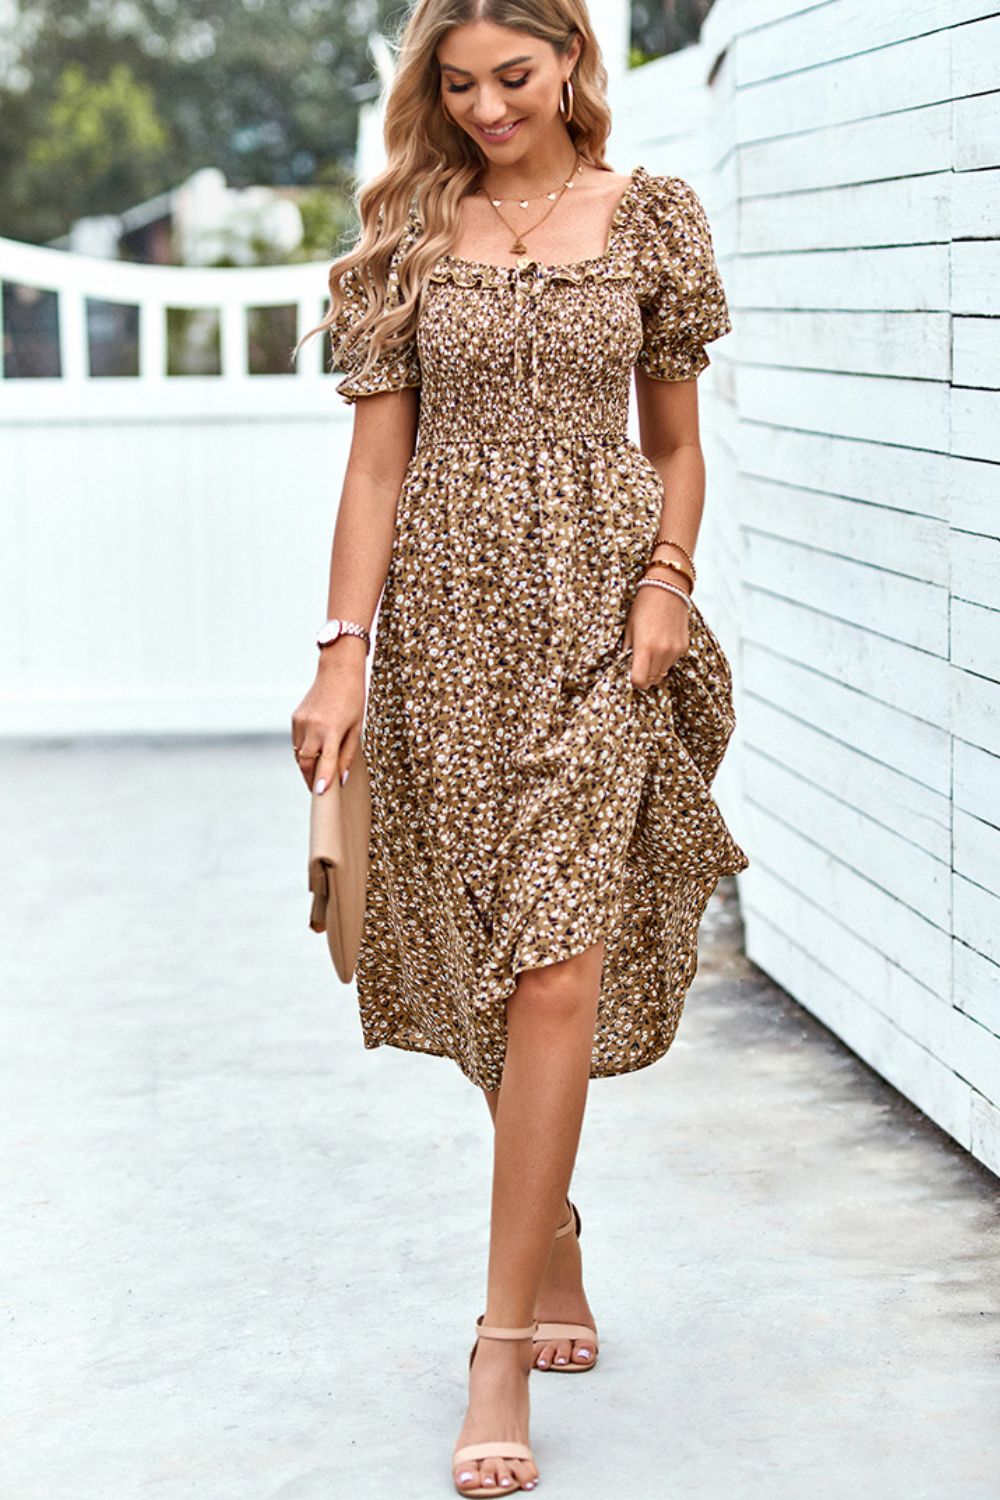 Floral Ruffled Square Neck Dress with Pockets